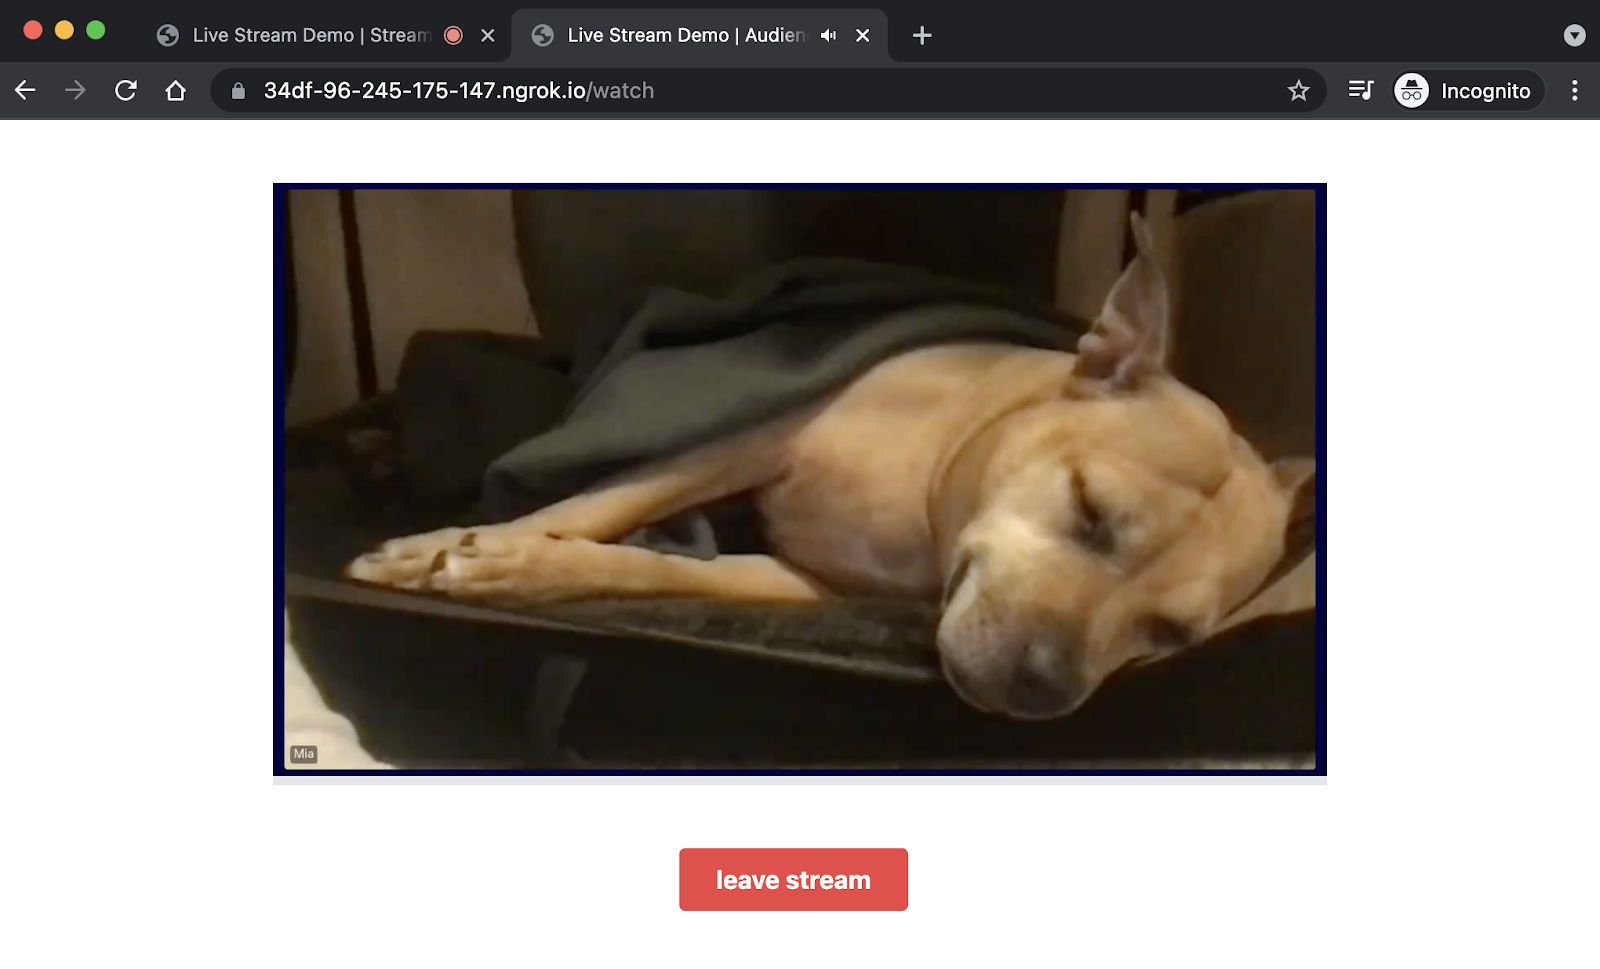 Audience view with livestream, showing sleeping pup. The "leave stream" button is just below the video.